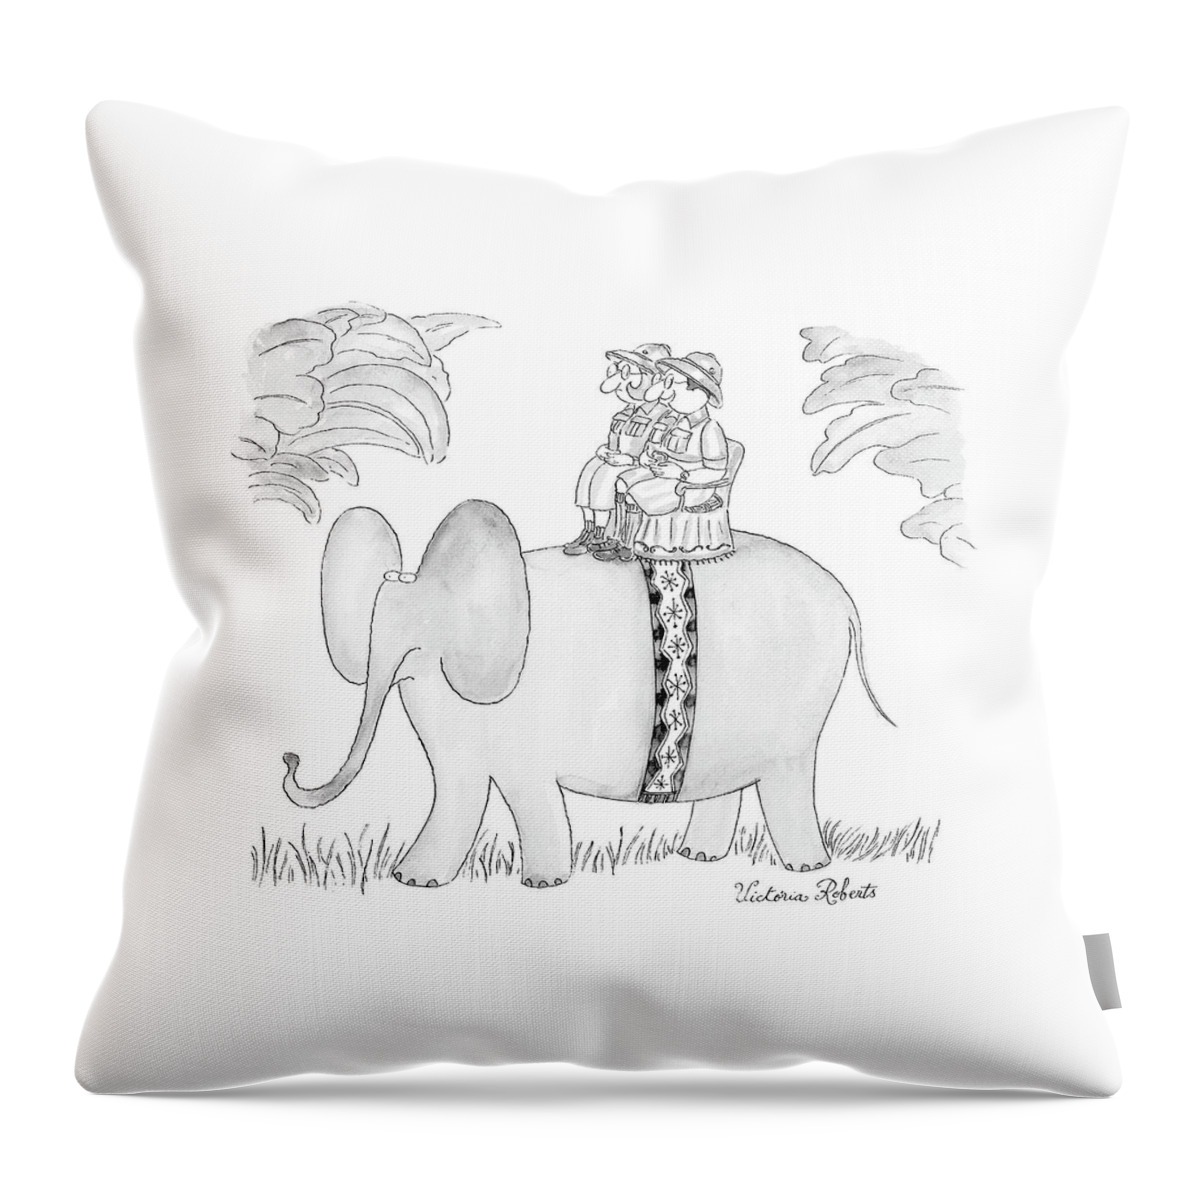 Well, Now We Know What The World Looks Like Throw Pillow